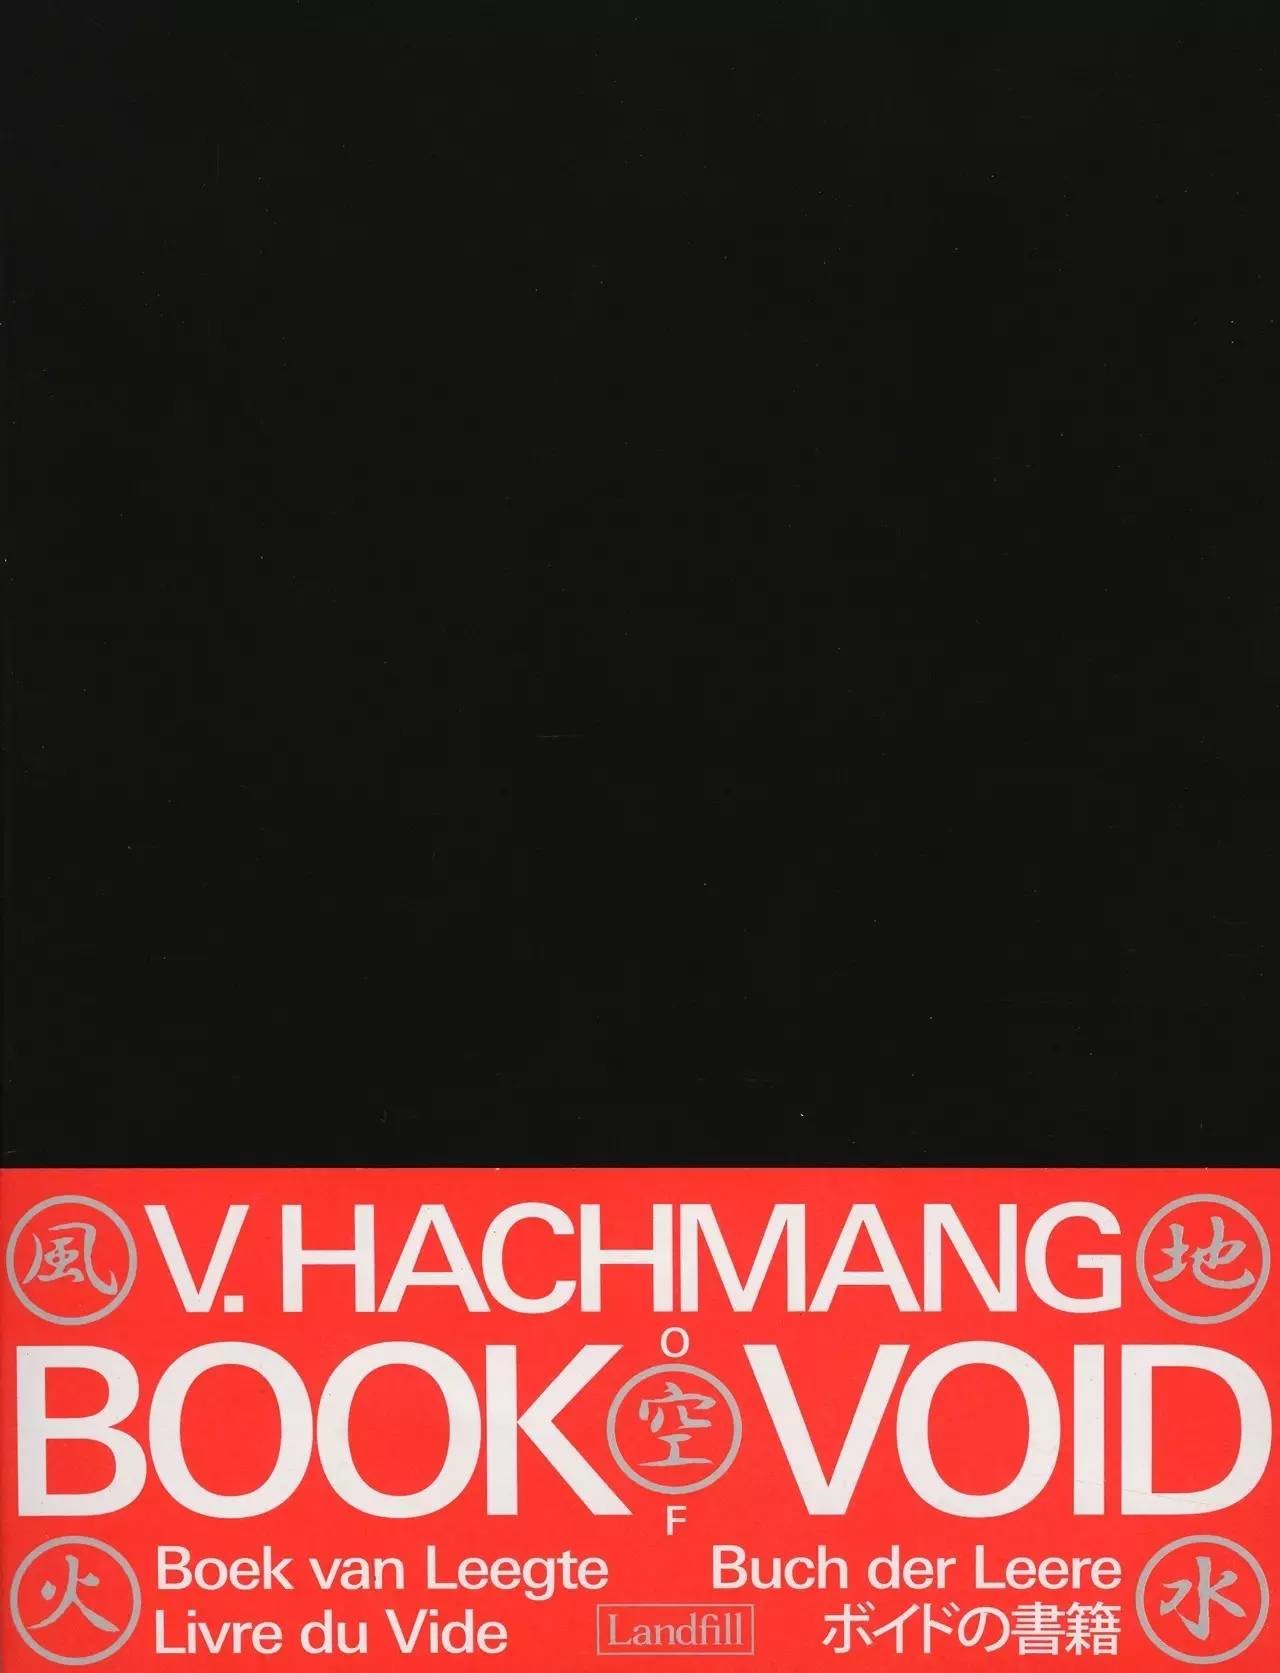 Review: Book of Void by Viktor Hachmang